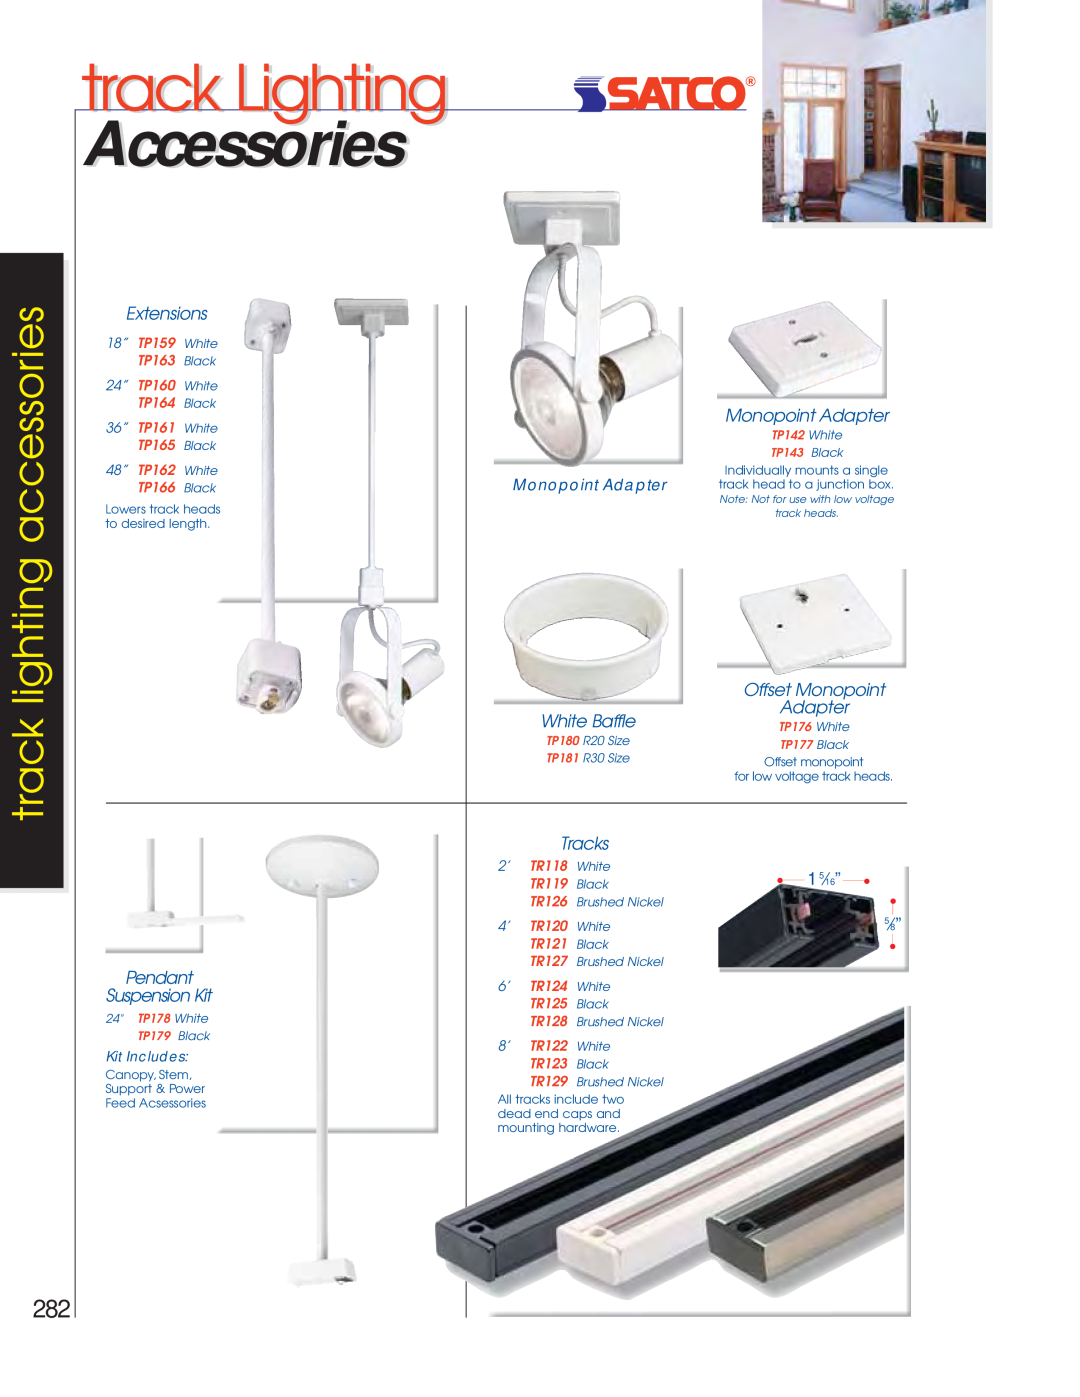 Satco Products R20 Step Cylinder track Lighting, Extensions, White Baffle, Offset Monopoint Adapter, Tracks, 1 5⁄16” 